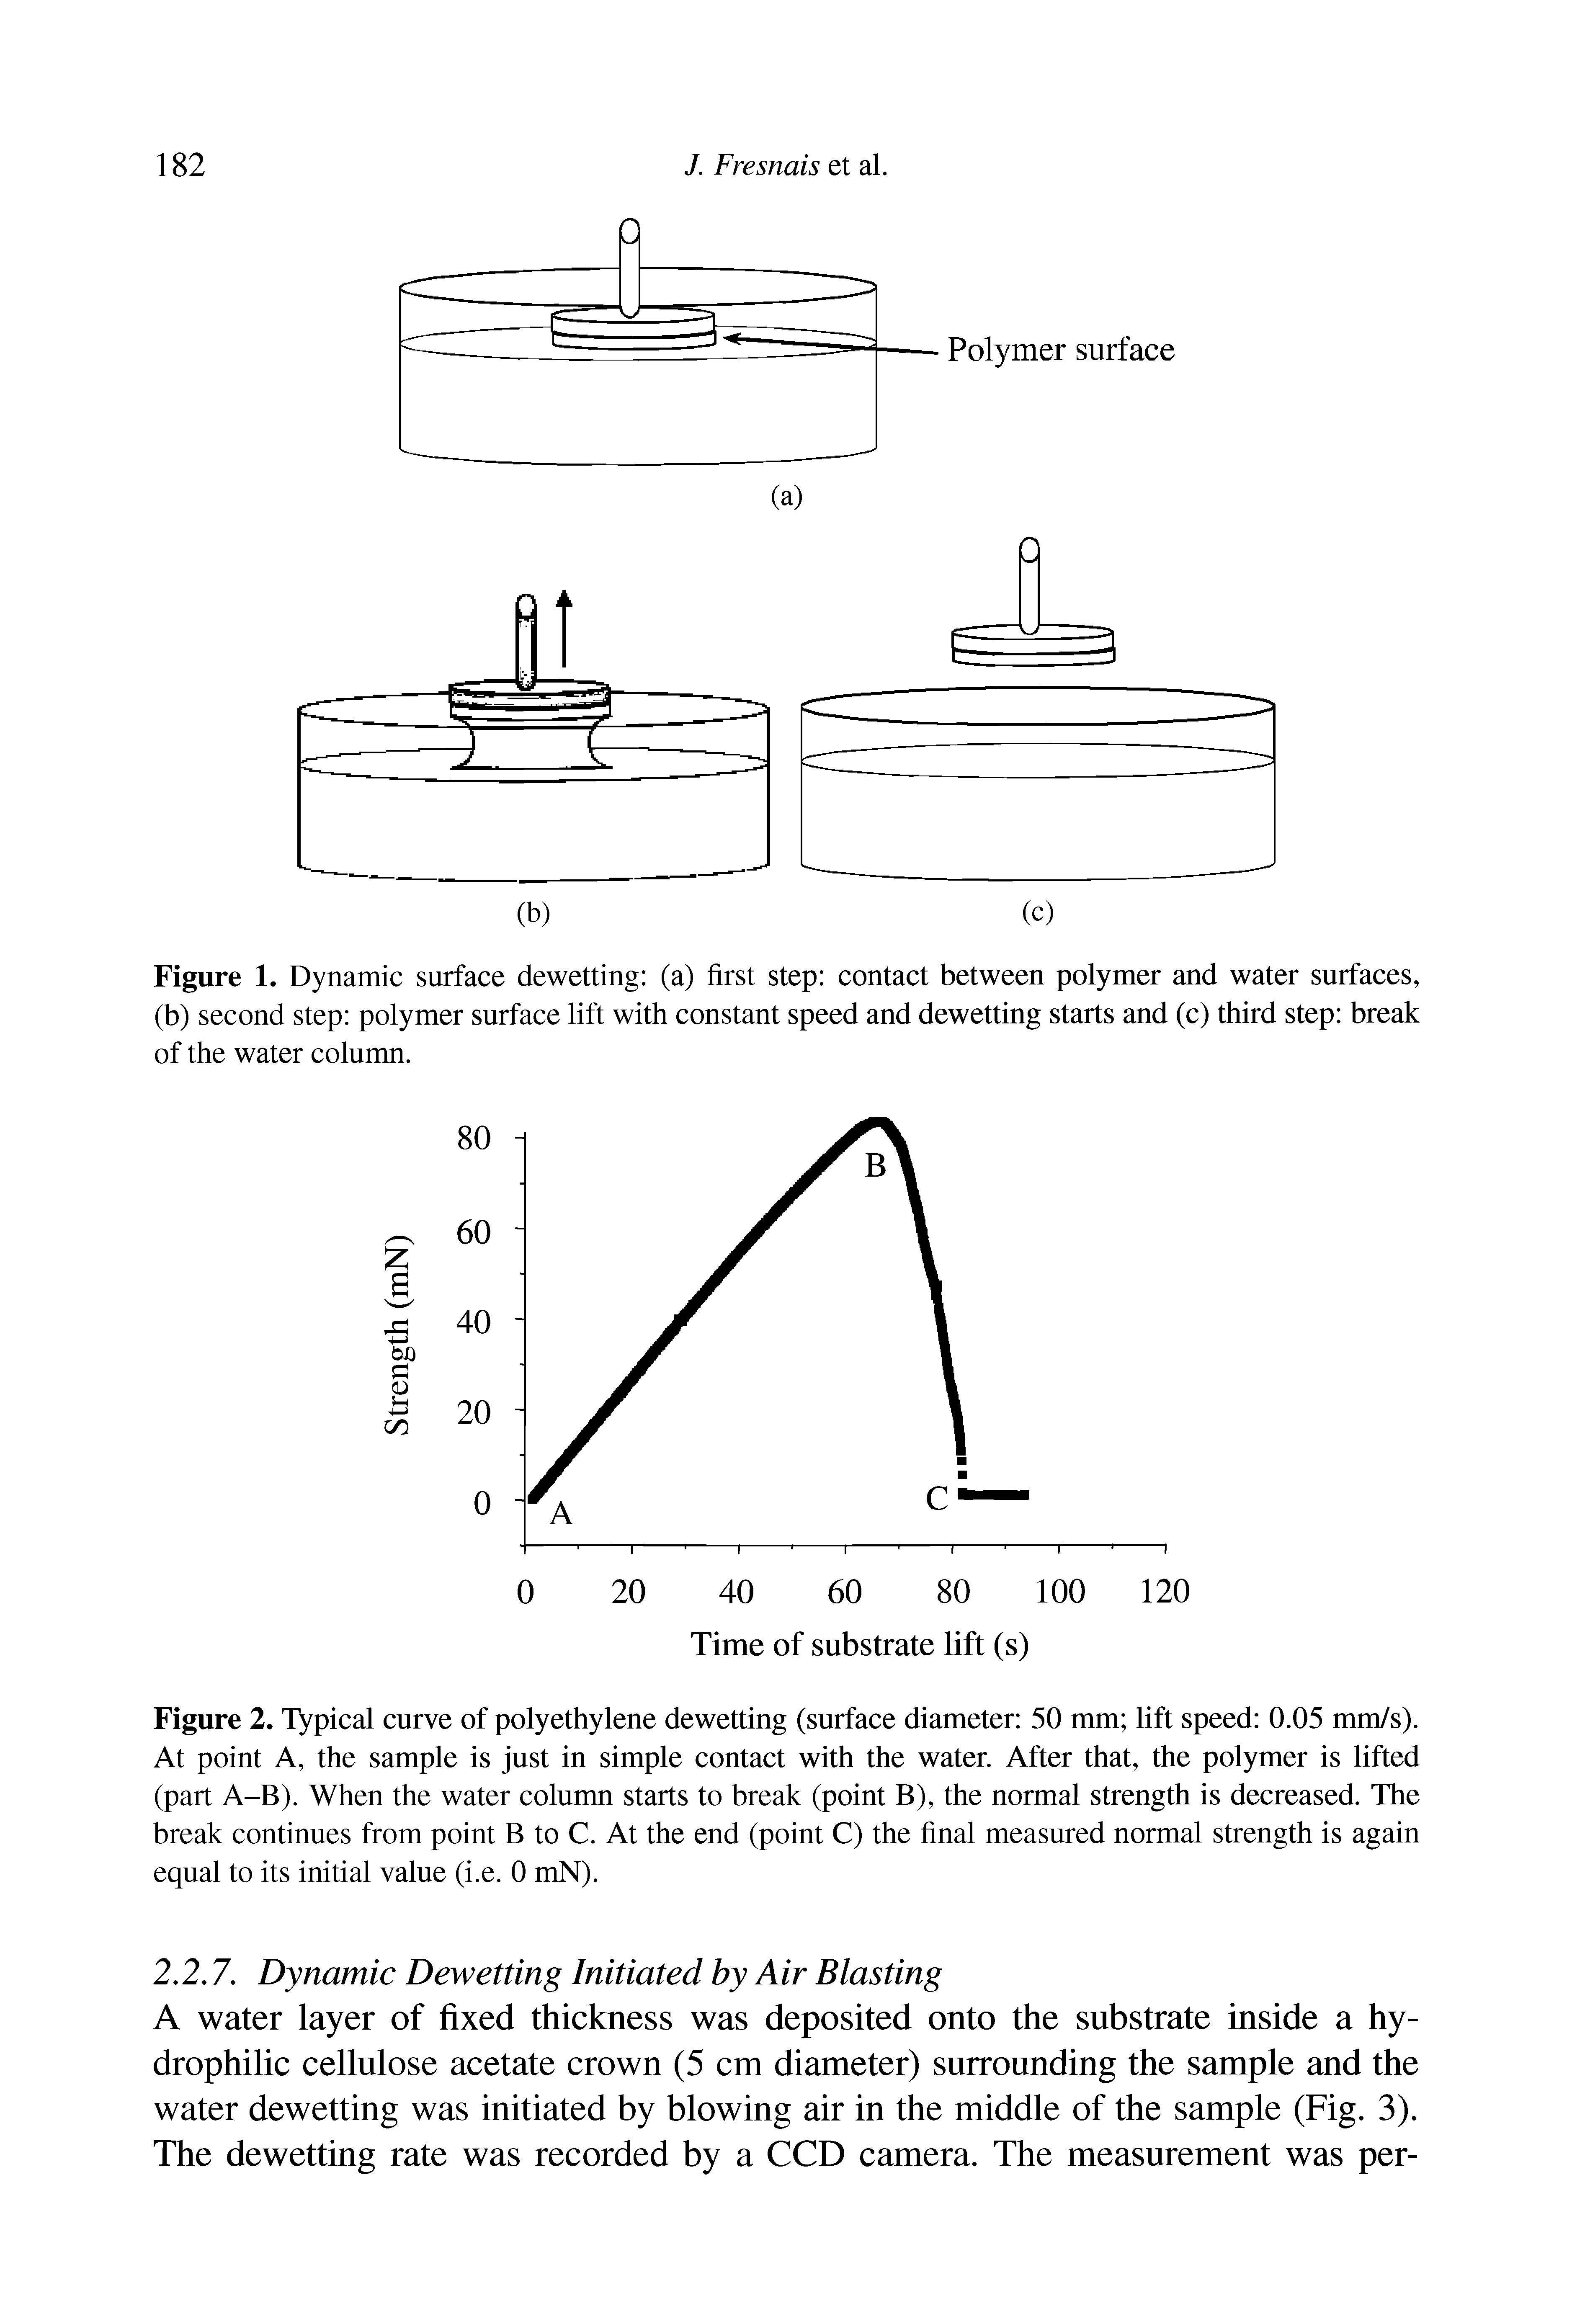 Figure 1. Dynamic surface dewetting (a) first step contact between polymer and water surfaces, (b) second step polymer surface lift with constant speed and dewetting starts and (c) third step break of the water column.